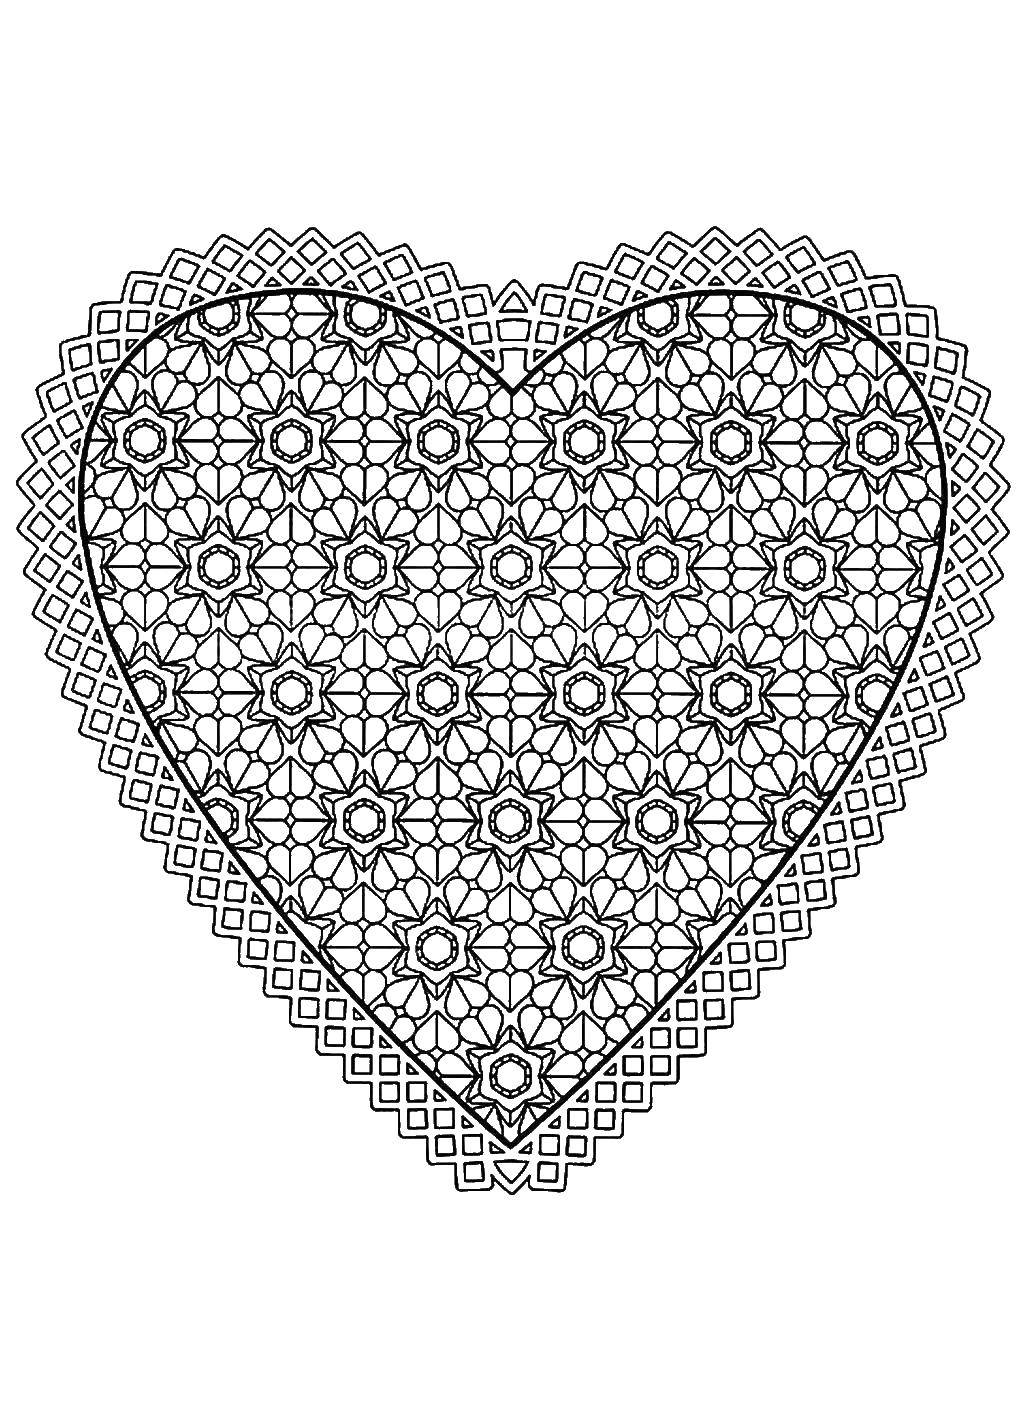 Coloring Neat heart patterns. Category patterns. Tags:  Patterns, hearts.